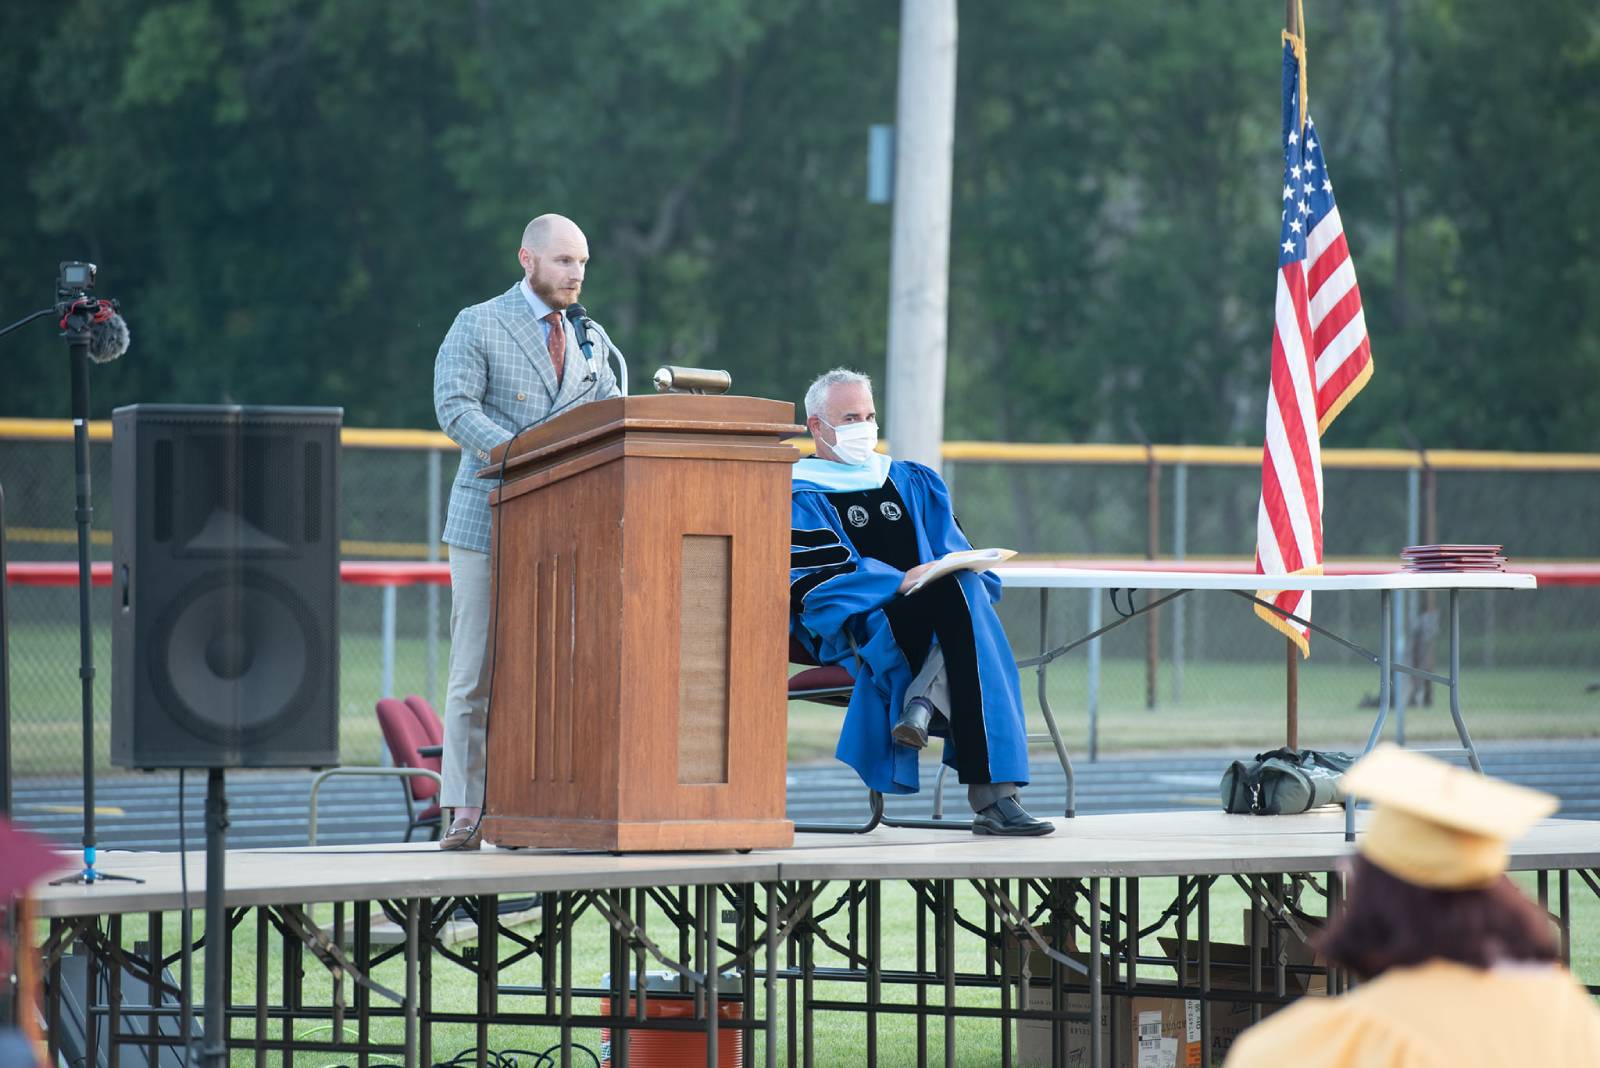 Commencement Address – River Forest c/o 2020